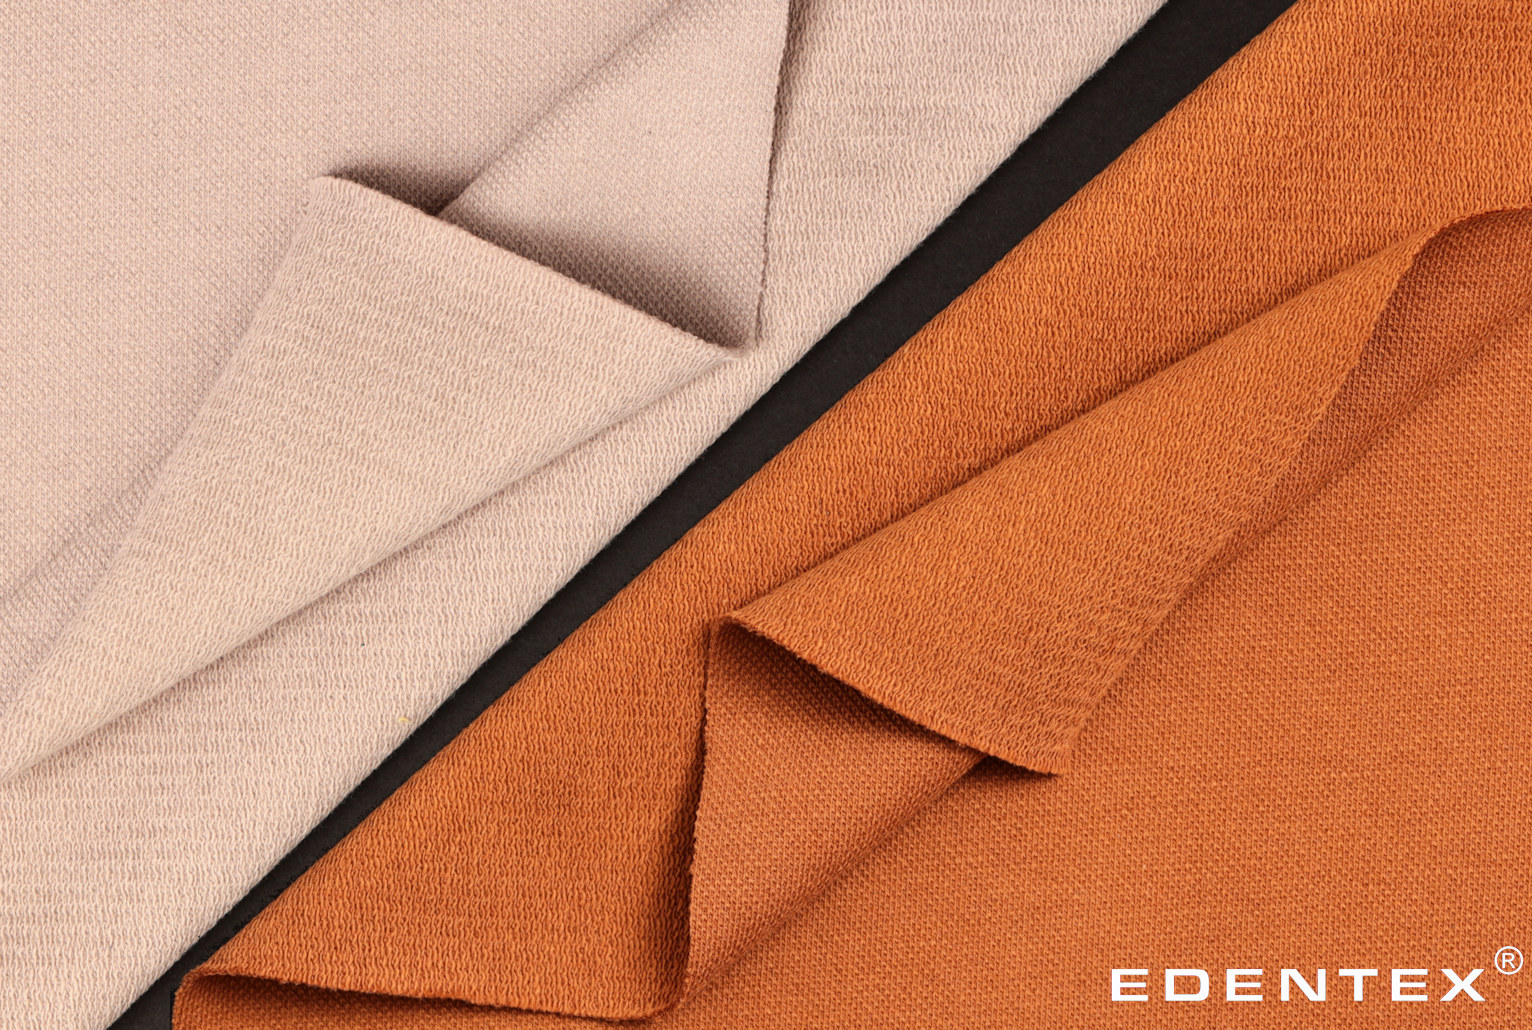 Thanks to EDENTEX BRIGHT COLOUR™ system each colour of EDENTEX® fabric is pure, bright, deeper and more intense